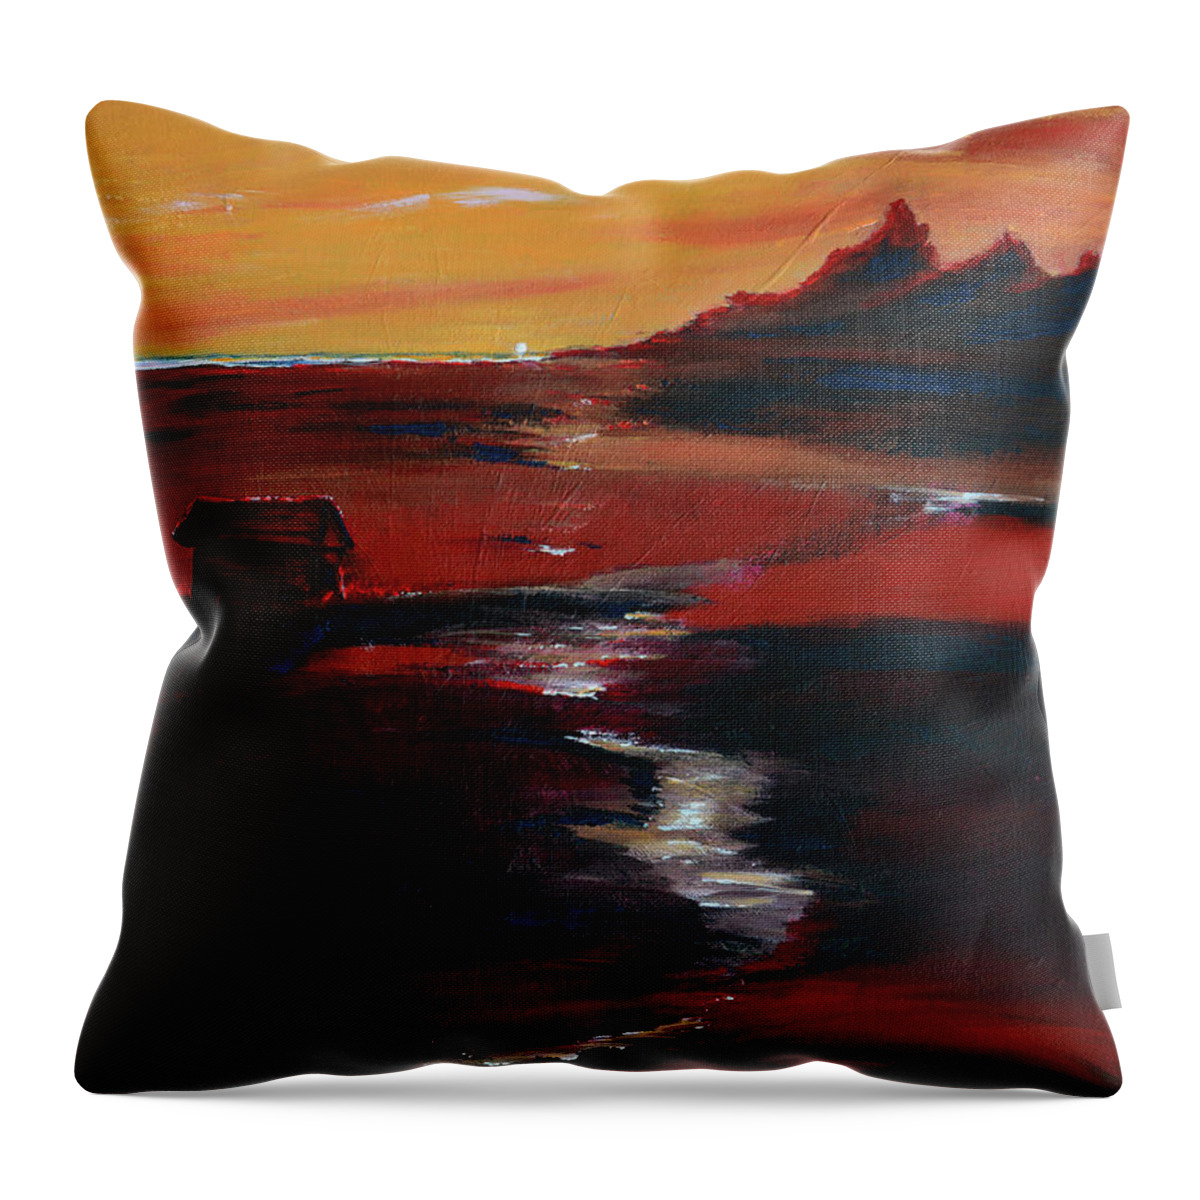 Landscape Throw Pillow featuring the painting Across Amber Fields To The Sea by Donna Blackhall